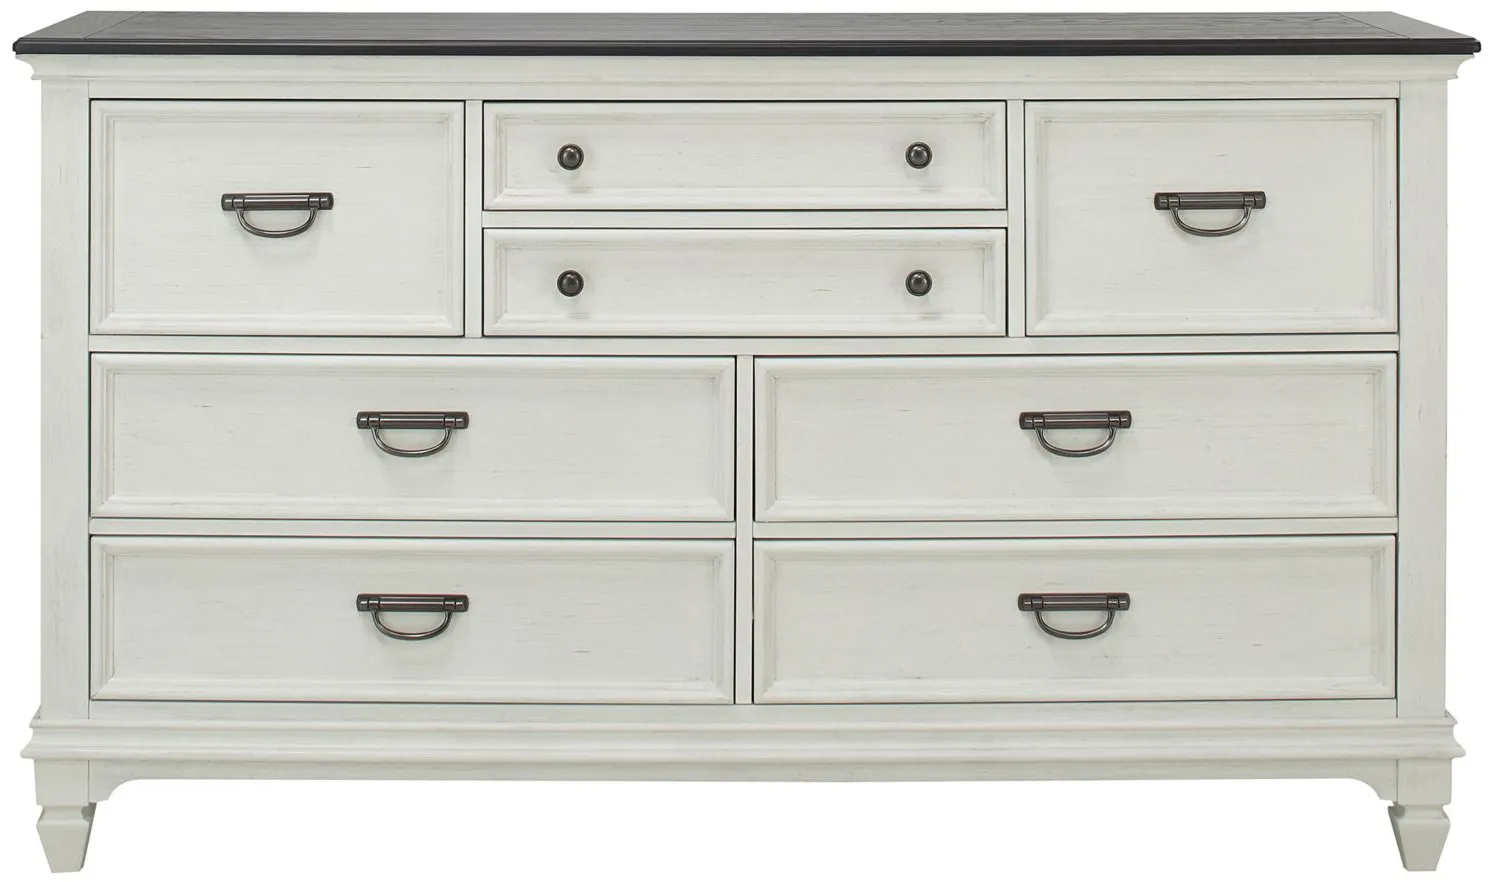 Shelby Dresser in Wirebrushed White with Charcoal Tops by Liberty Furniture